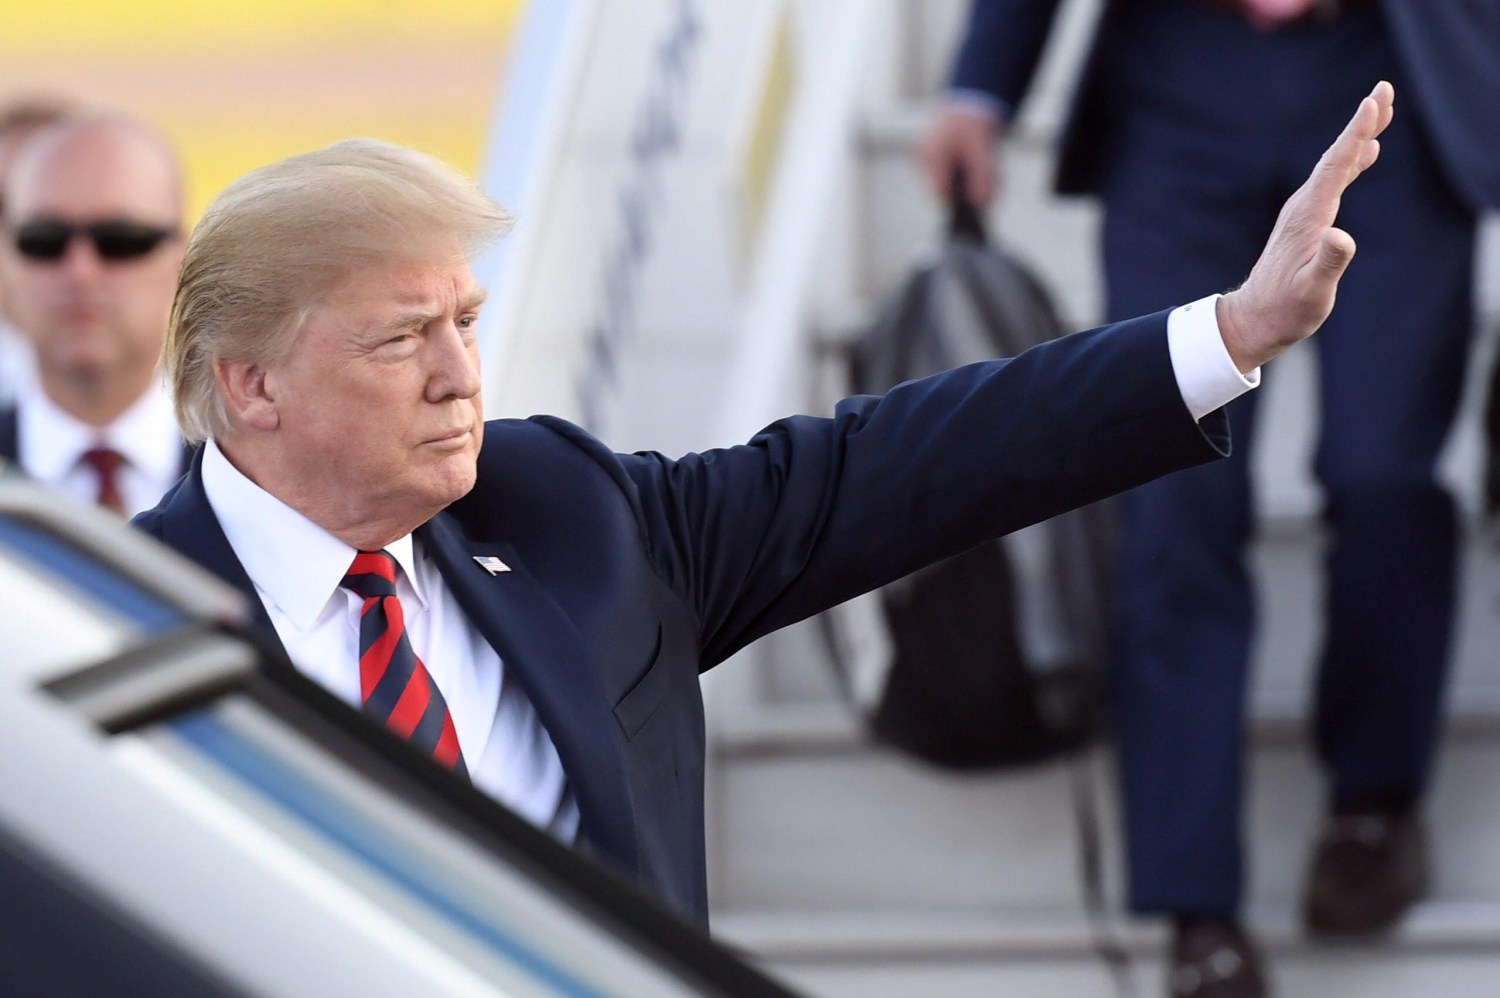 U.S. President Donald Trump waves to the media after arriving in Vantaa, Finland, July 15, 2018. Lehtikuva/Heikki Saukkomaa via REUTERS ATTENTION EDITORS - THIS IMAGE WAS PROVIDED BY A THIRD PARTY. NO THIRD PARTY SALES. NOT FOR USE BY REUTERS THIRD PARTY DISTRIBUTORS. FINLAND OUT. - RC146B60FF50